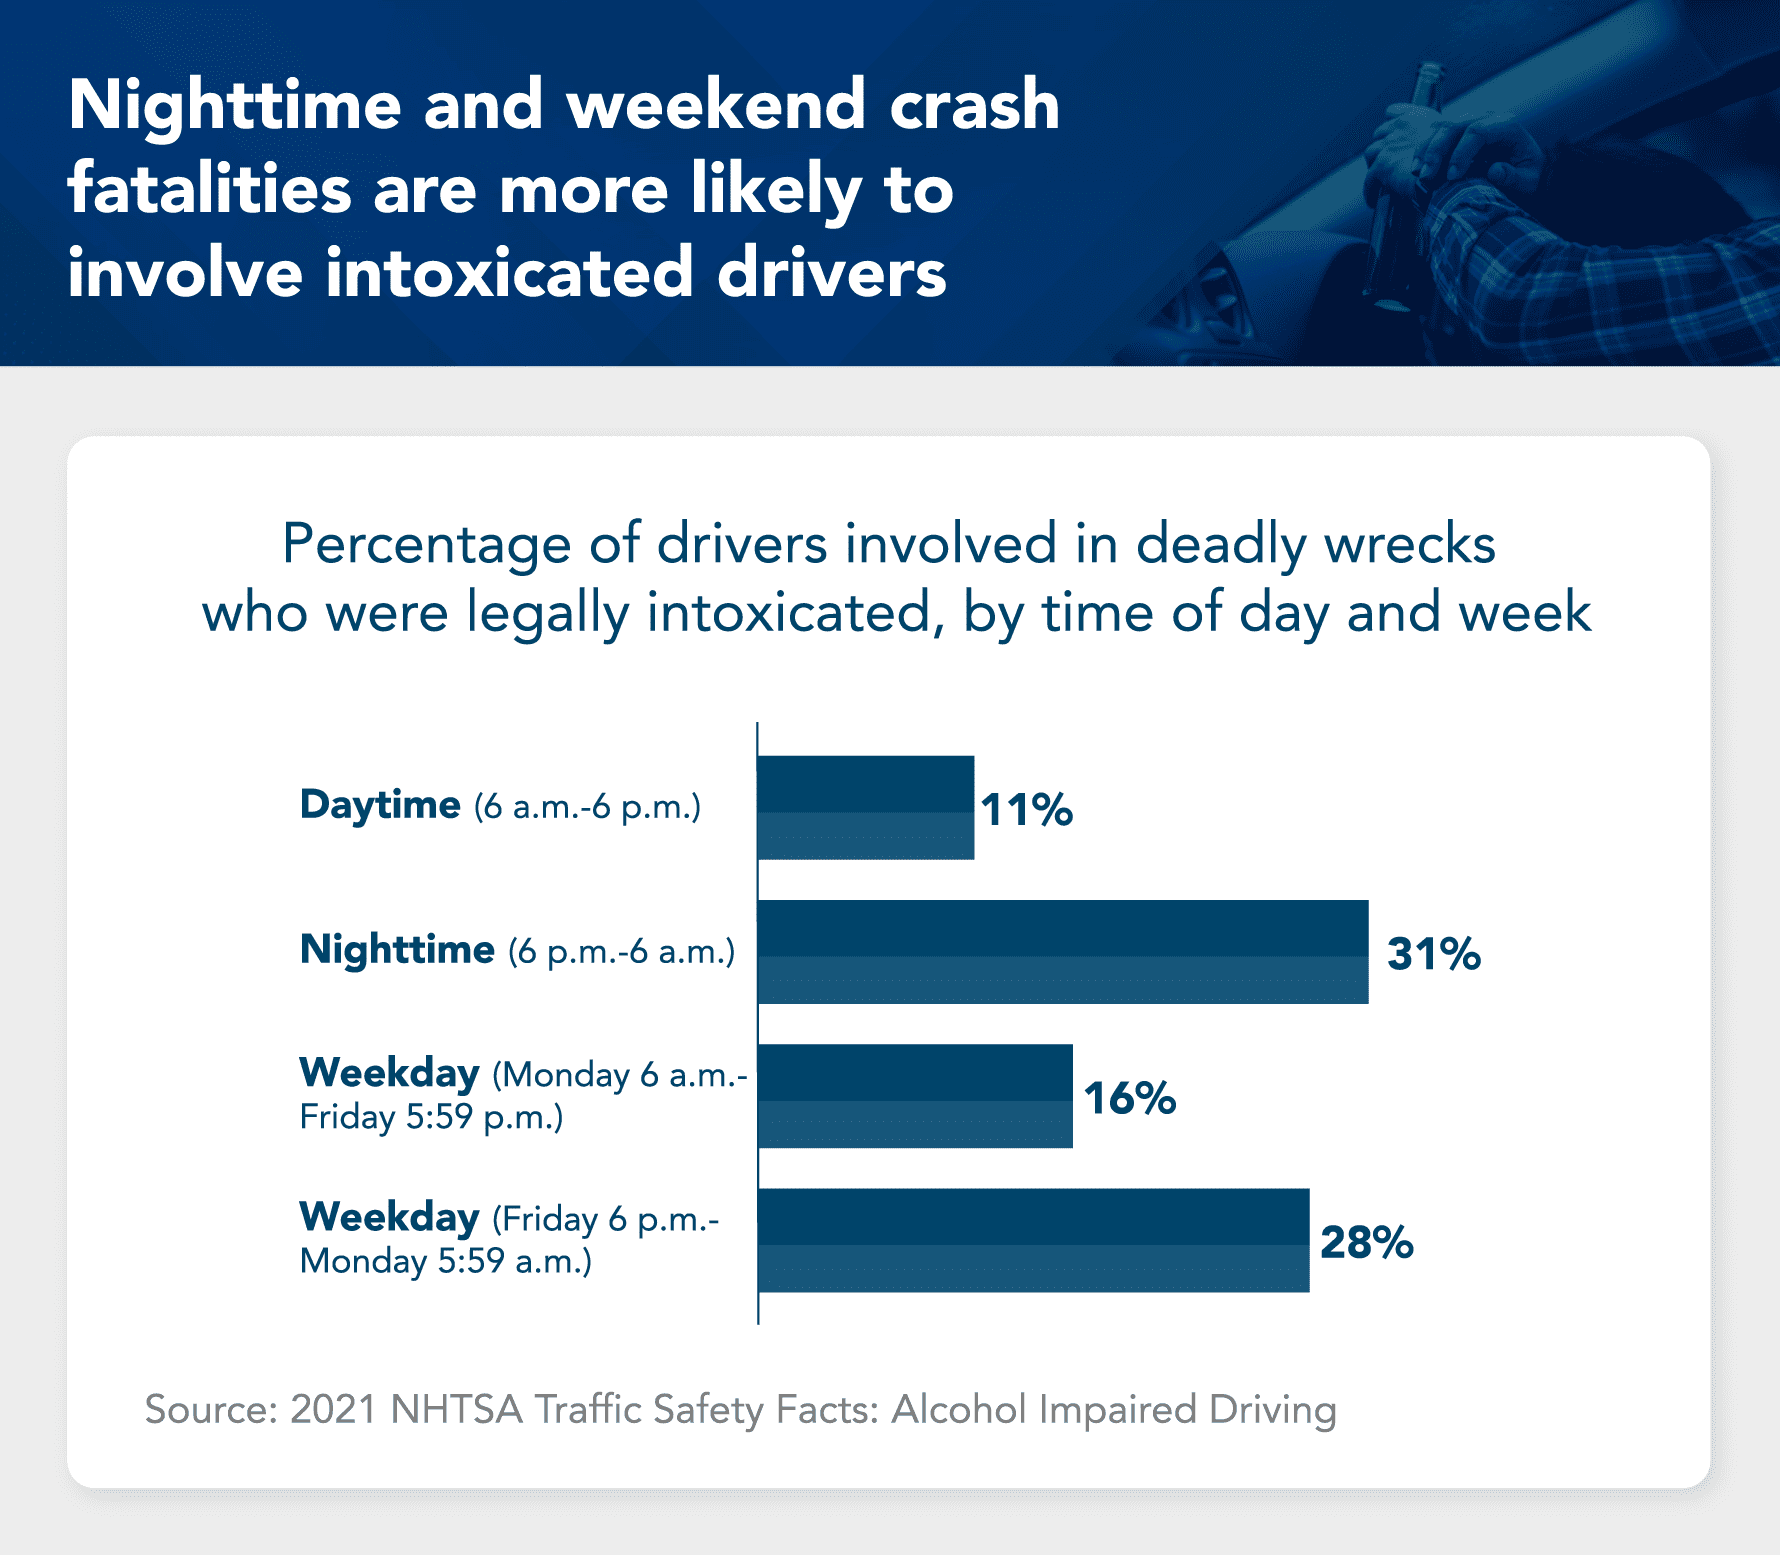 Nighttime and weekend crash fatalities are more likely to involve introxicated drivers